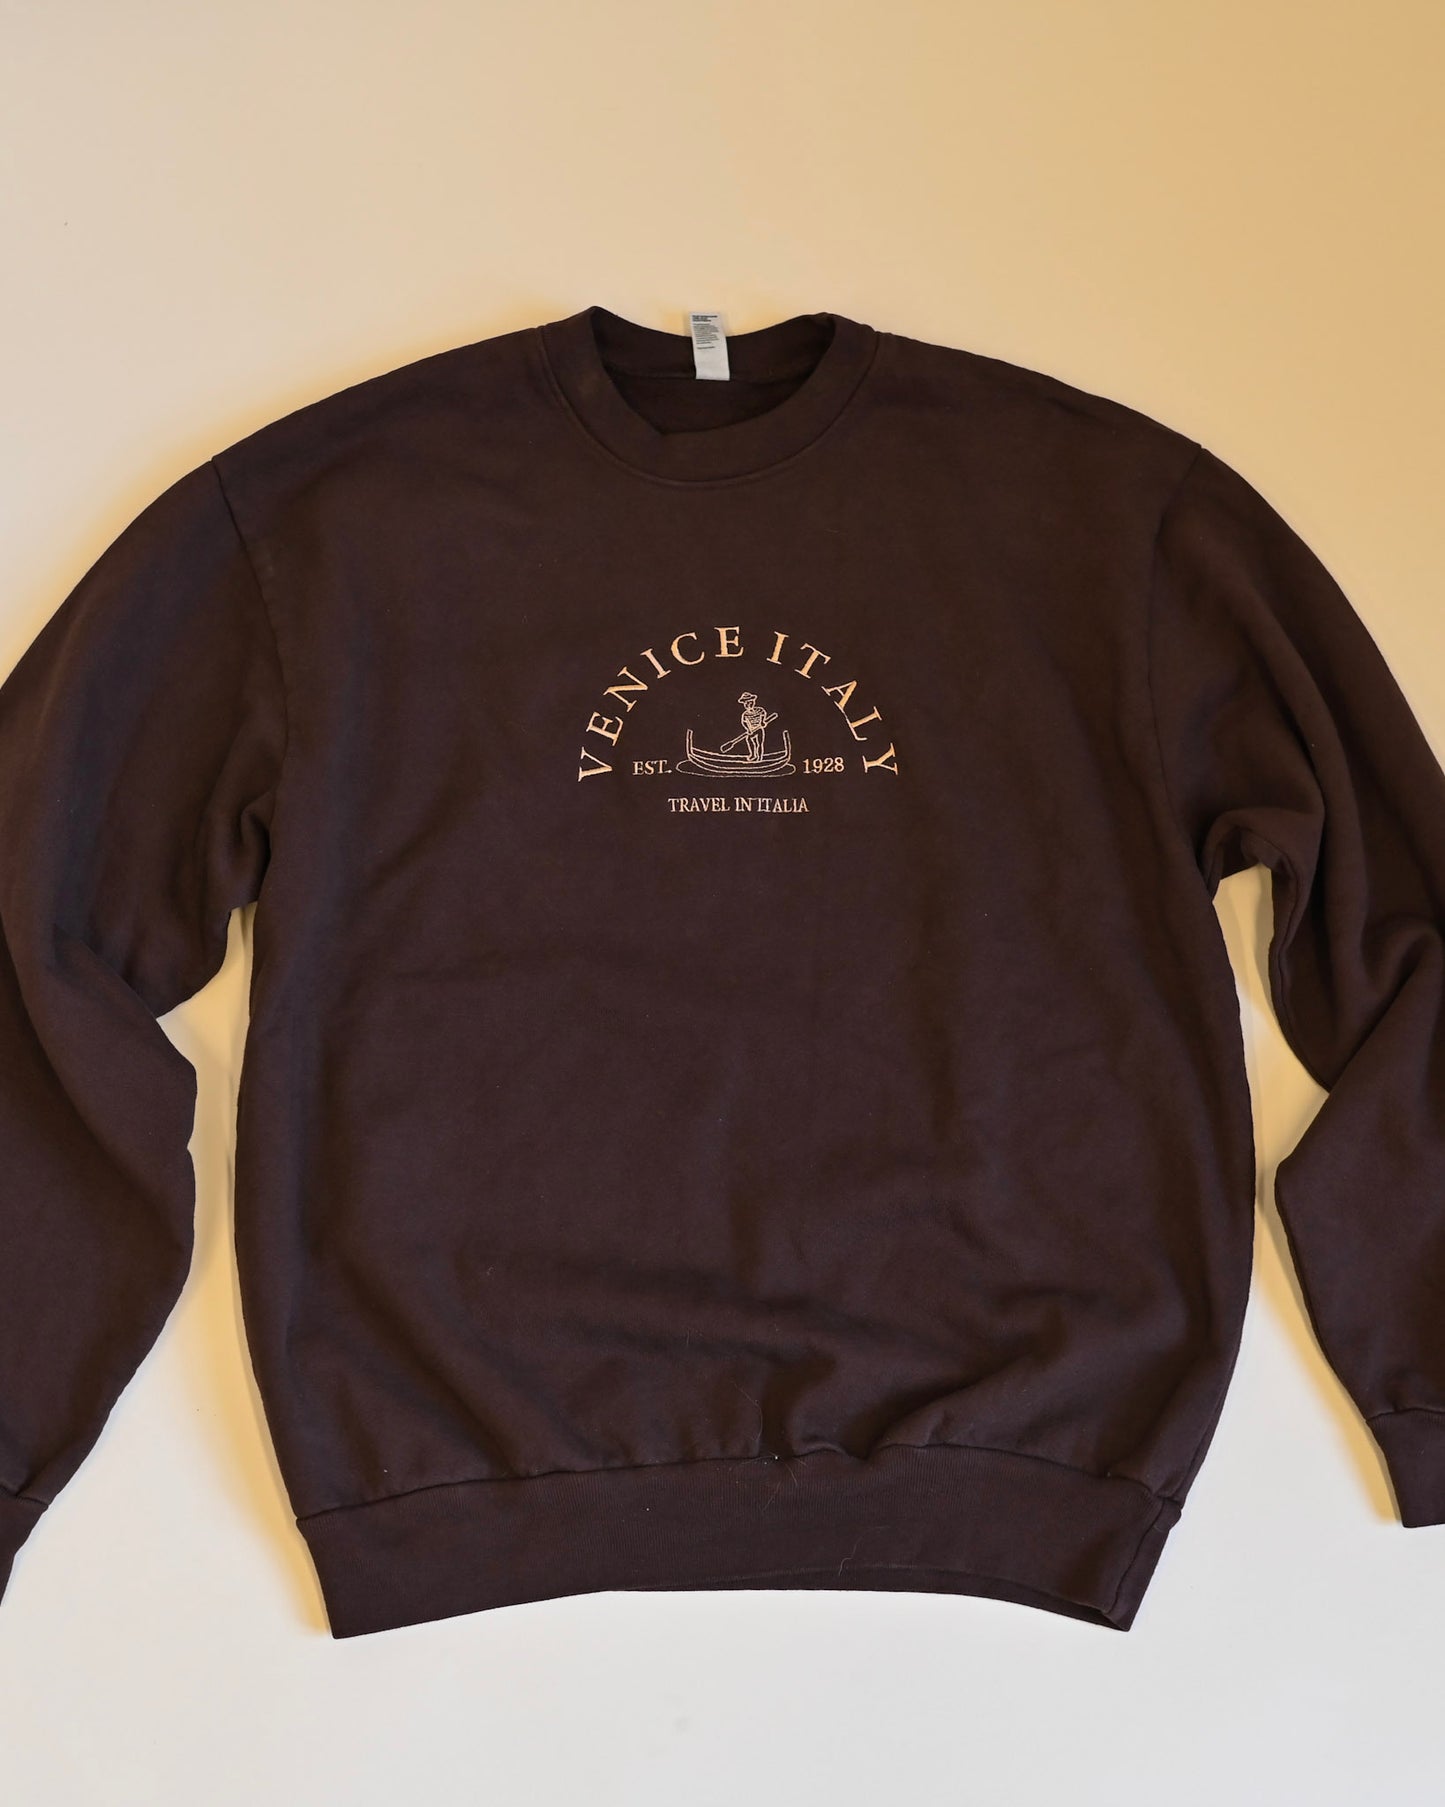 Venice Italy embroidered Heavy weight brown crewneck